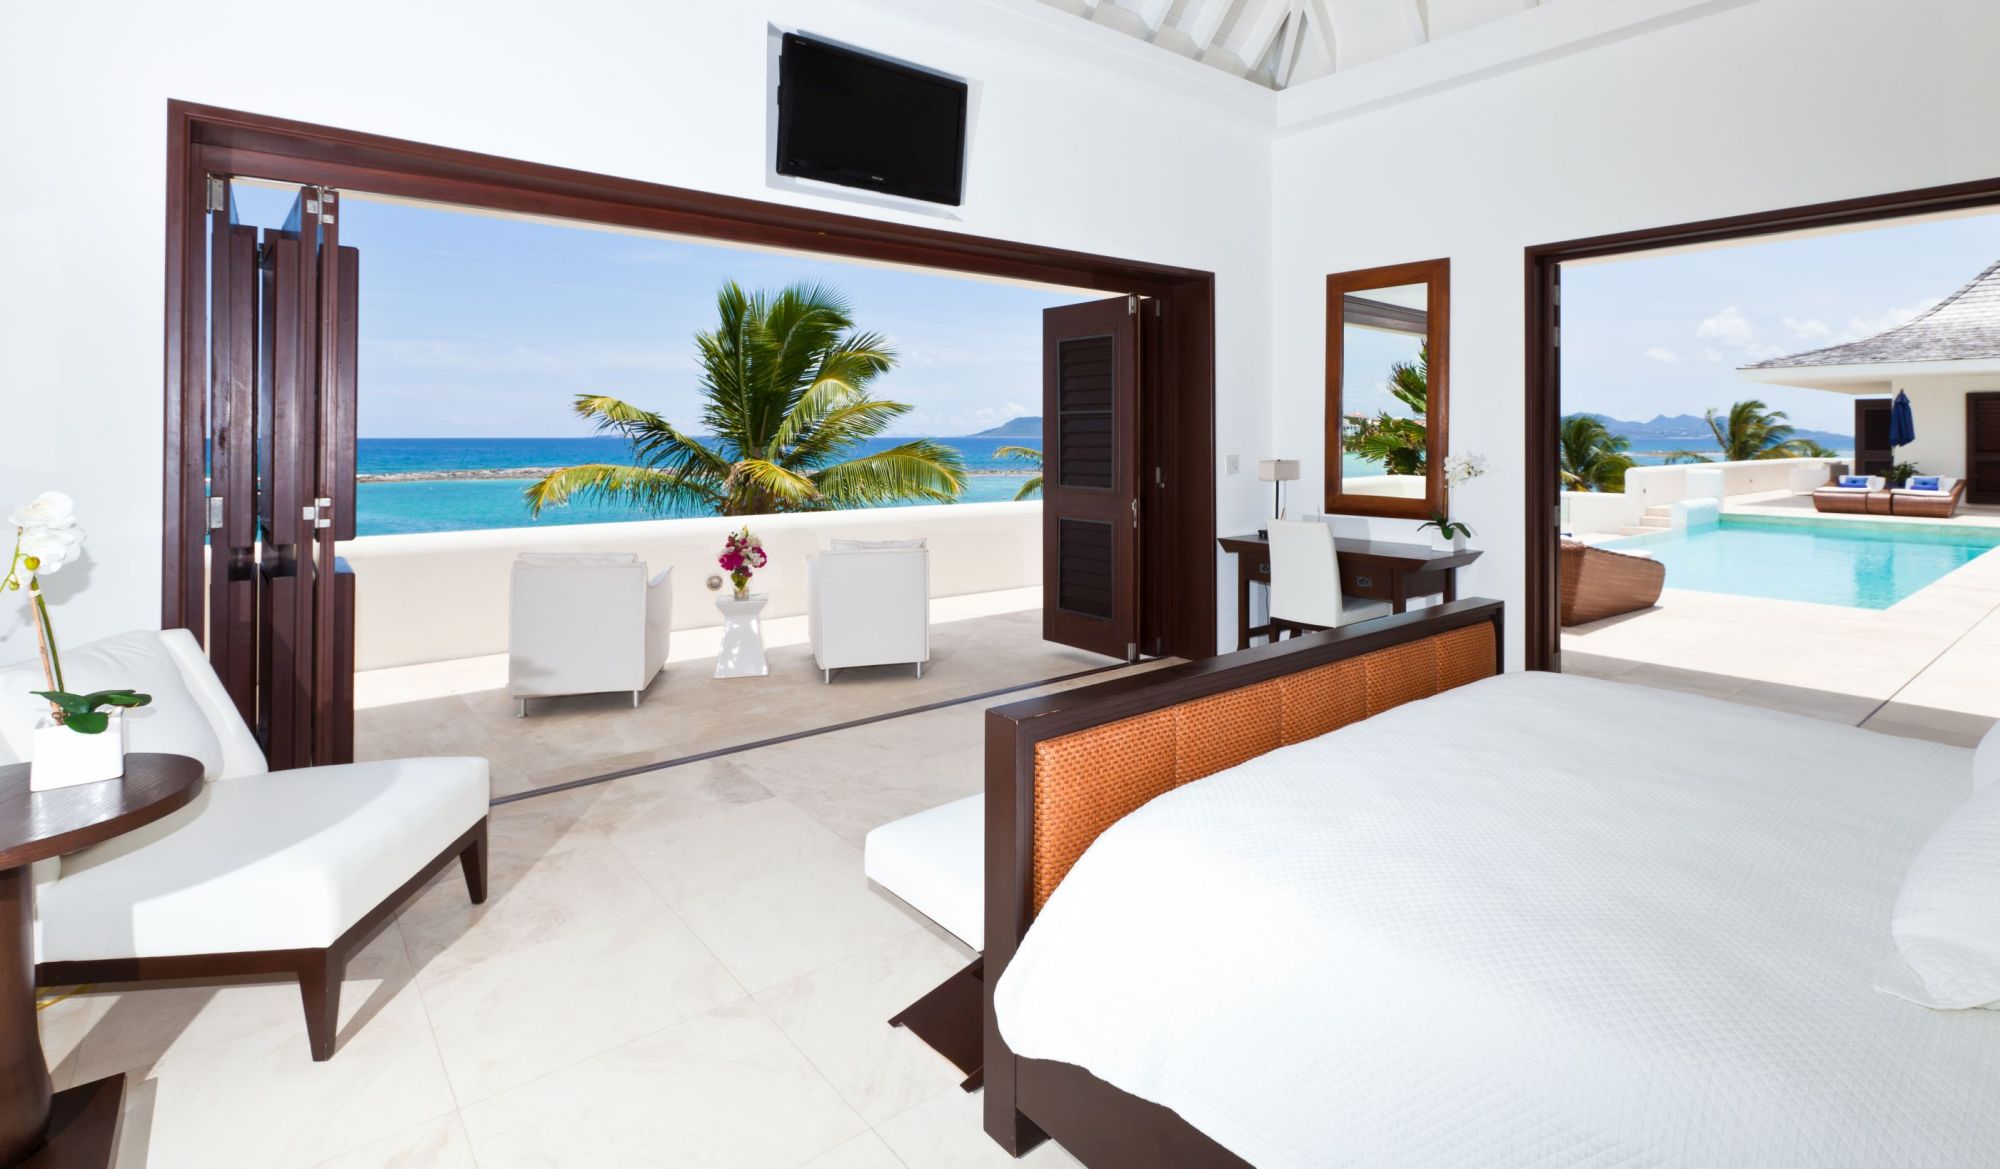 double bedroom with swimming pool and terrace access at le bleu, anguilla